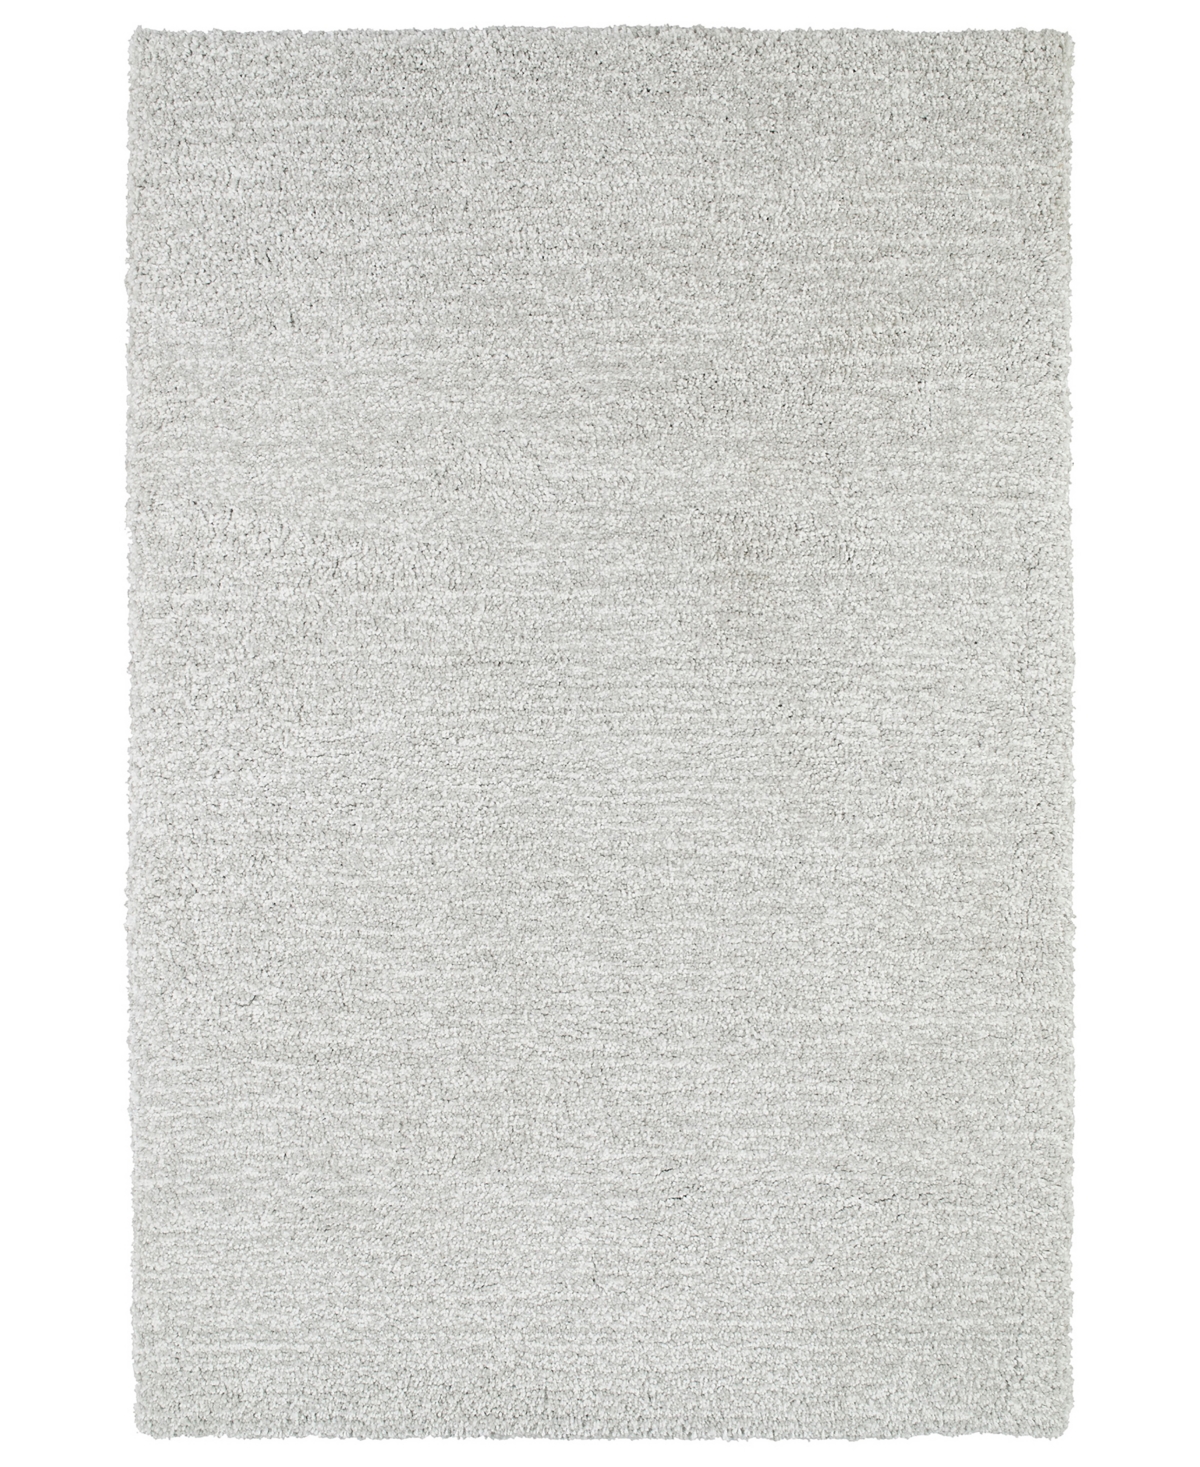 Kaleen Cotton Bloom Ctb01 Area Rug, 2' X 3' In Silver